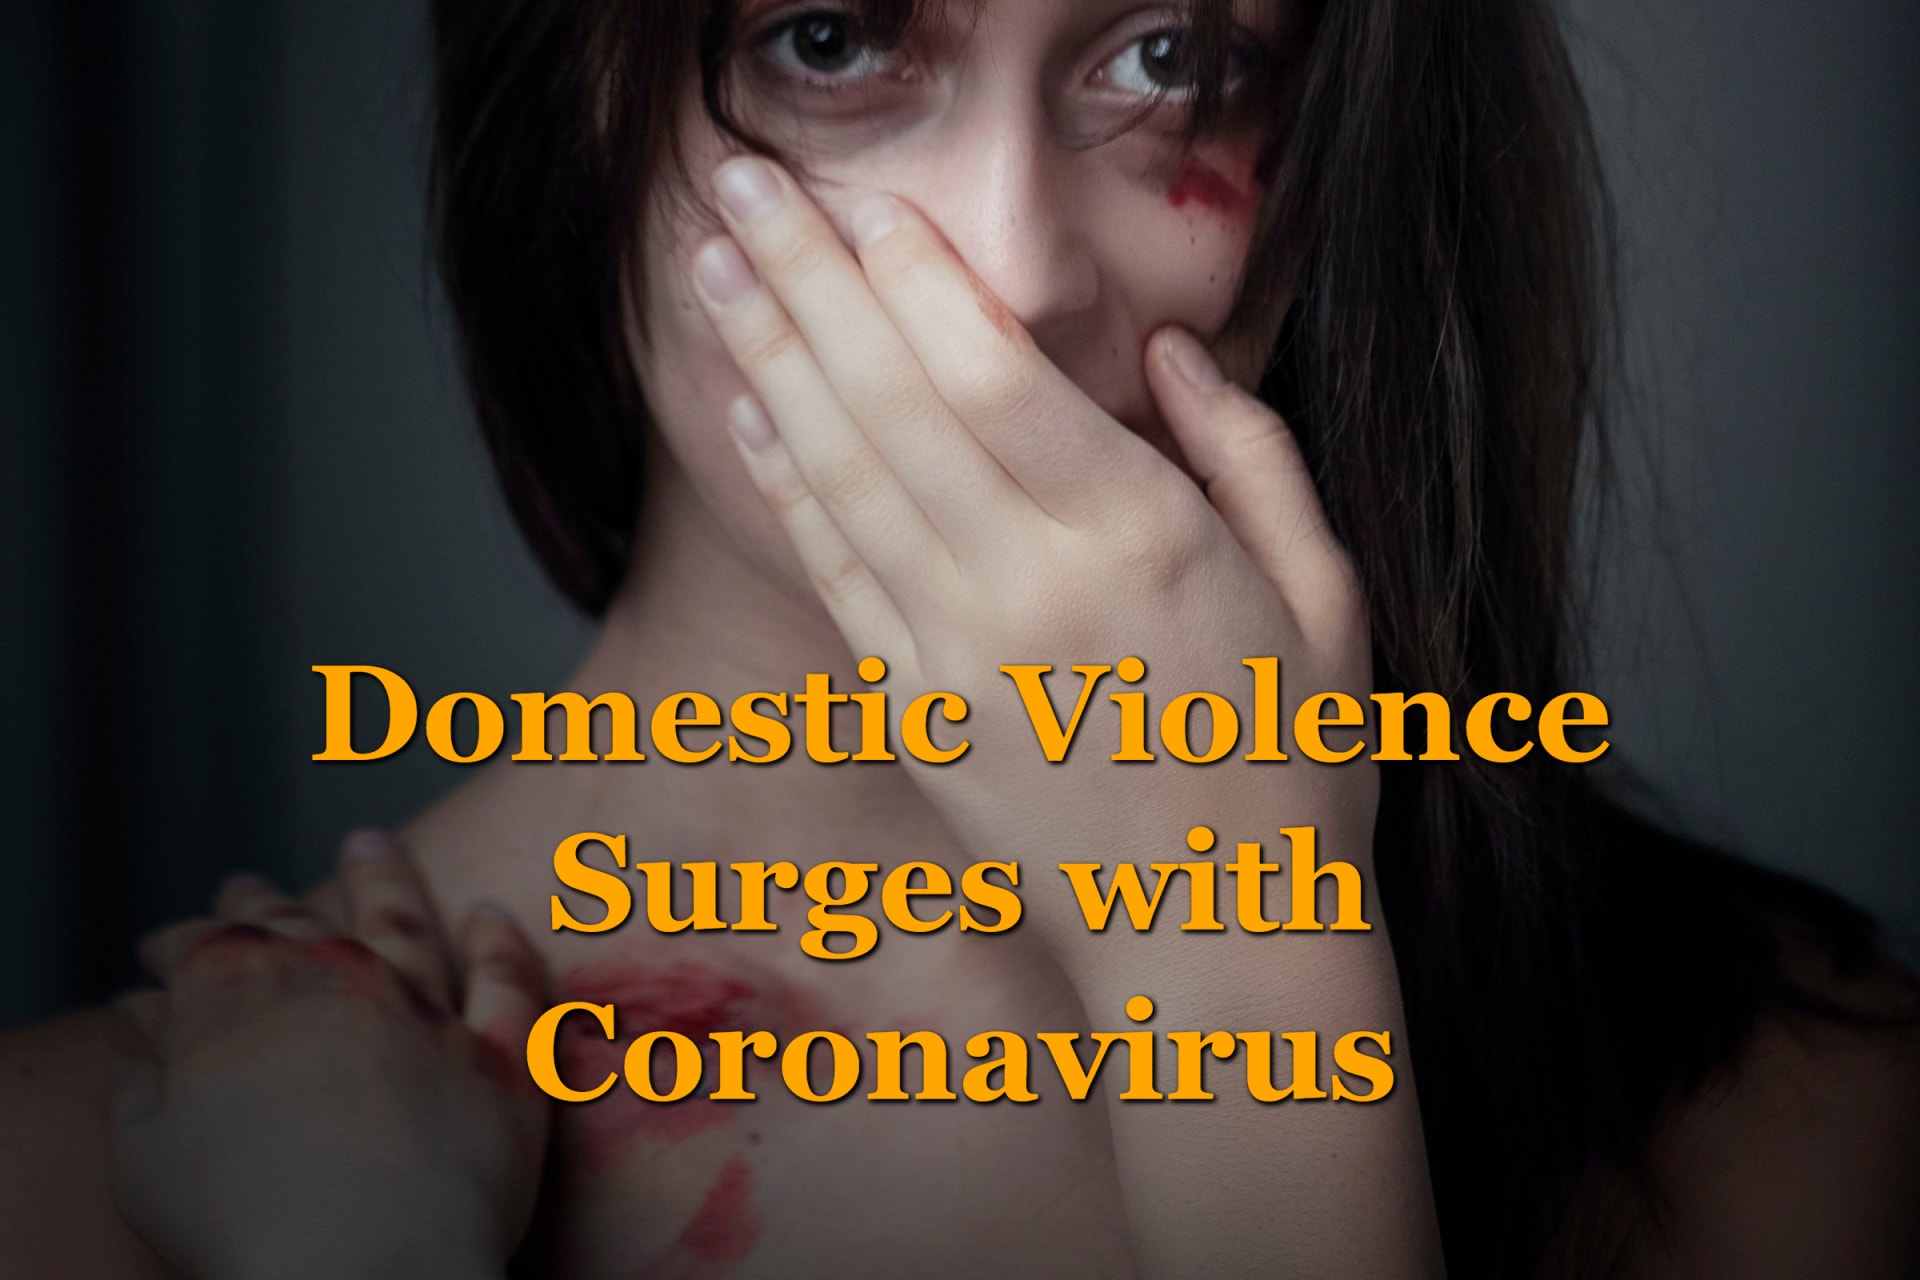 A woman, a victim of domestic violence surges during coronavirus lockdown with her hand over her mouth.